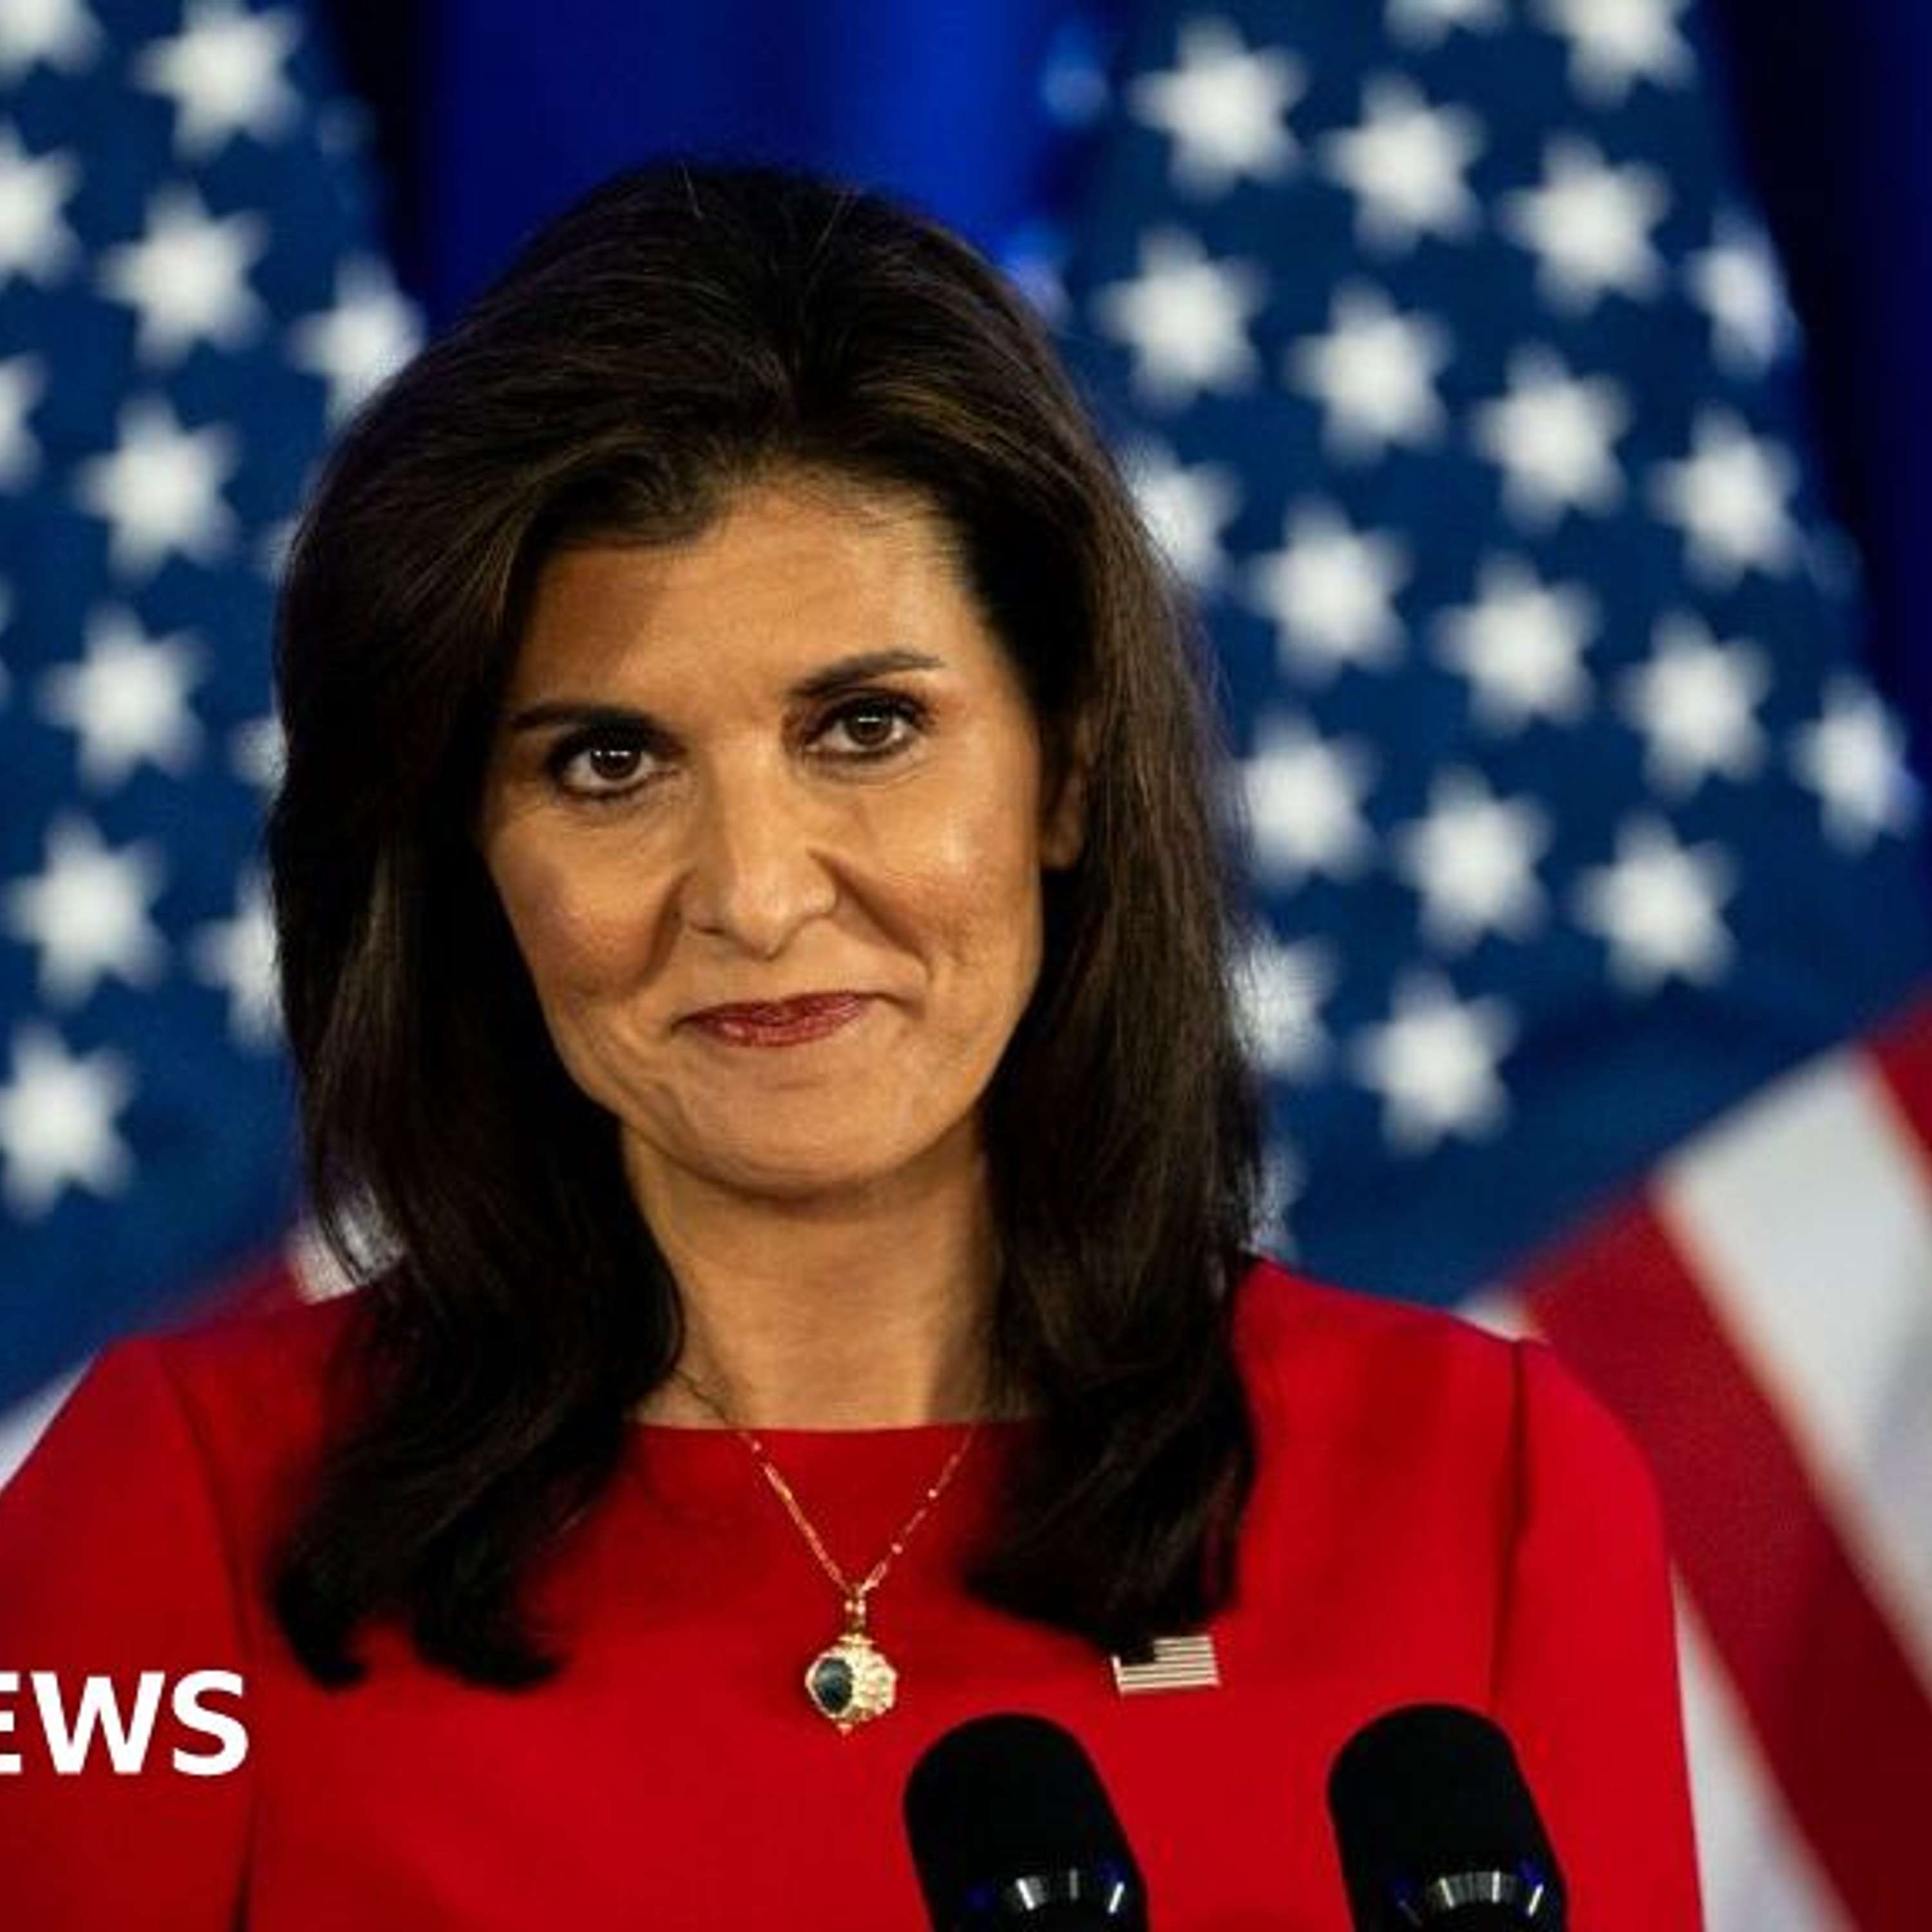 China Escalates Taiwan Tensions, Live Nation Antitrust Lawsuit, Nikki Haley Backs Trump, Trump Courts Minority Voters, and more...